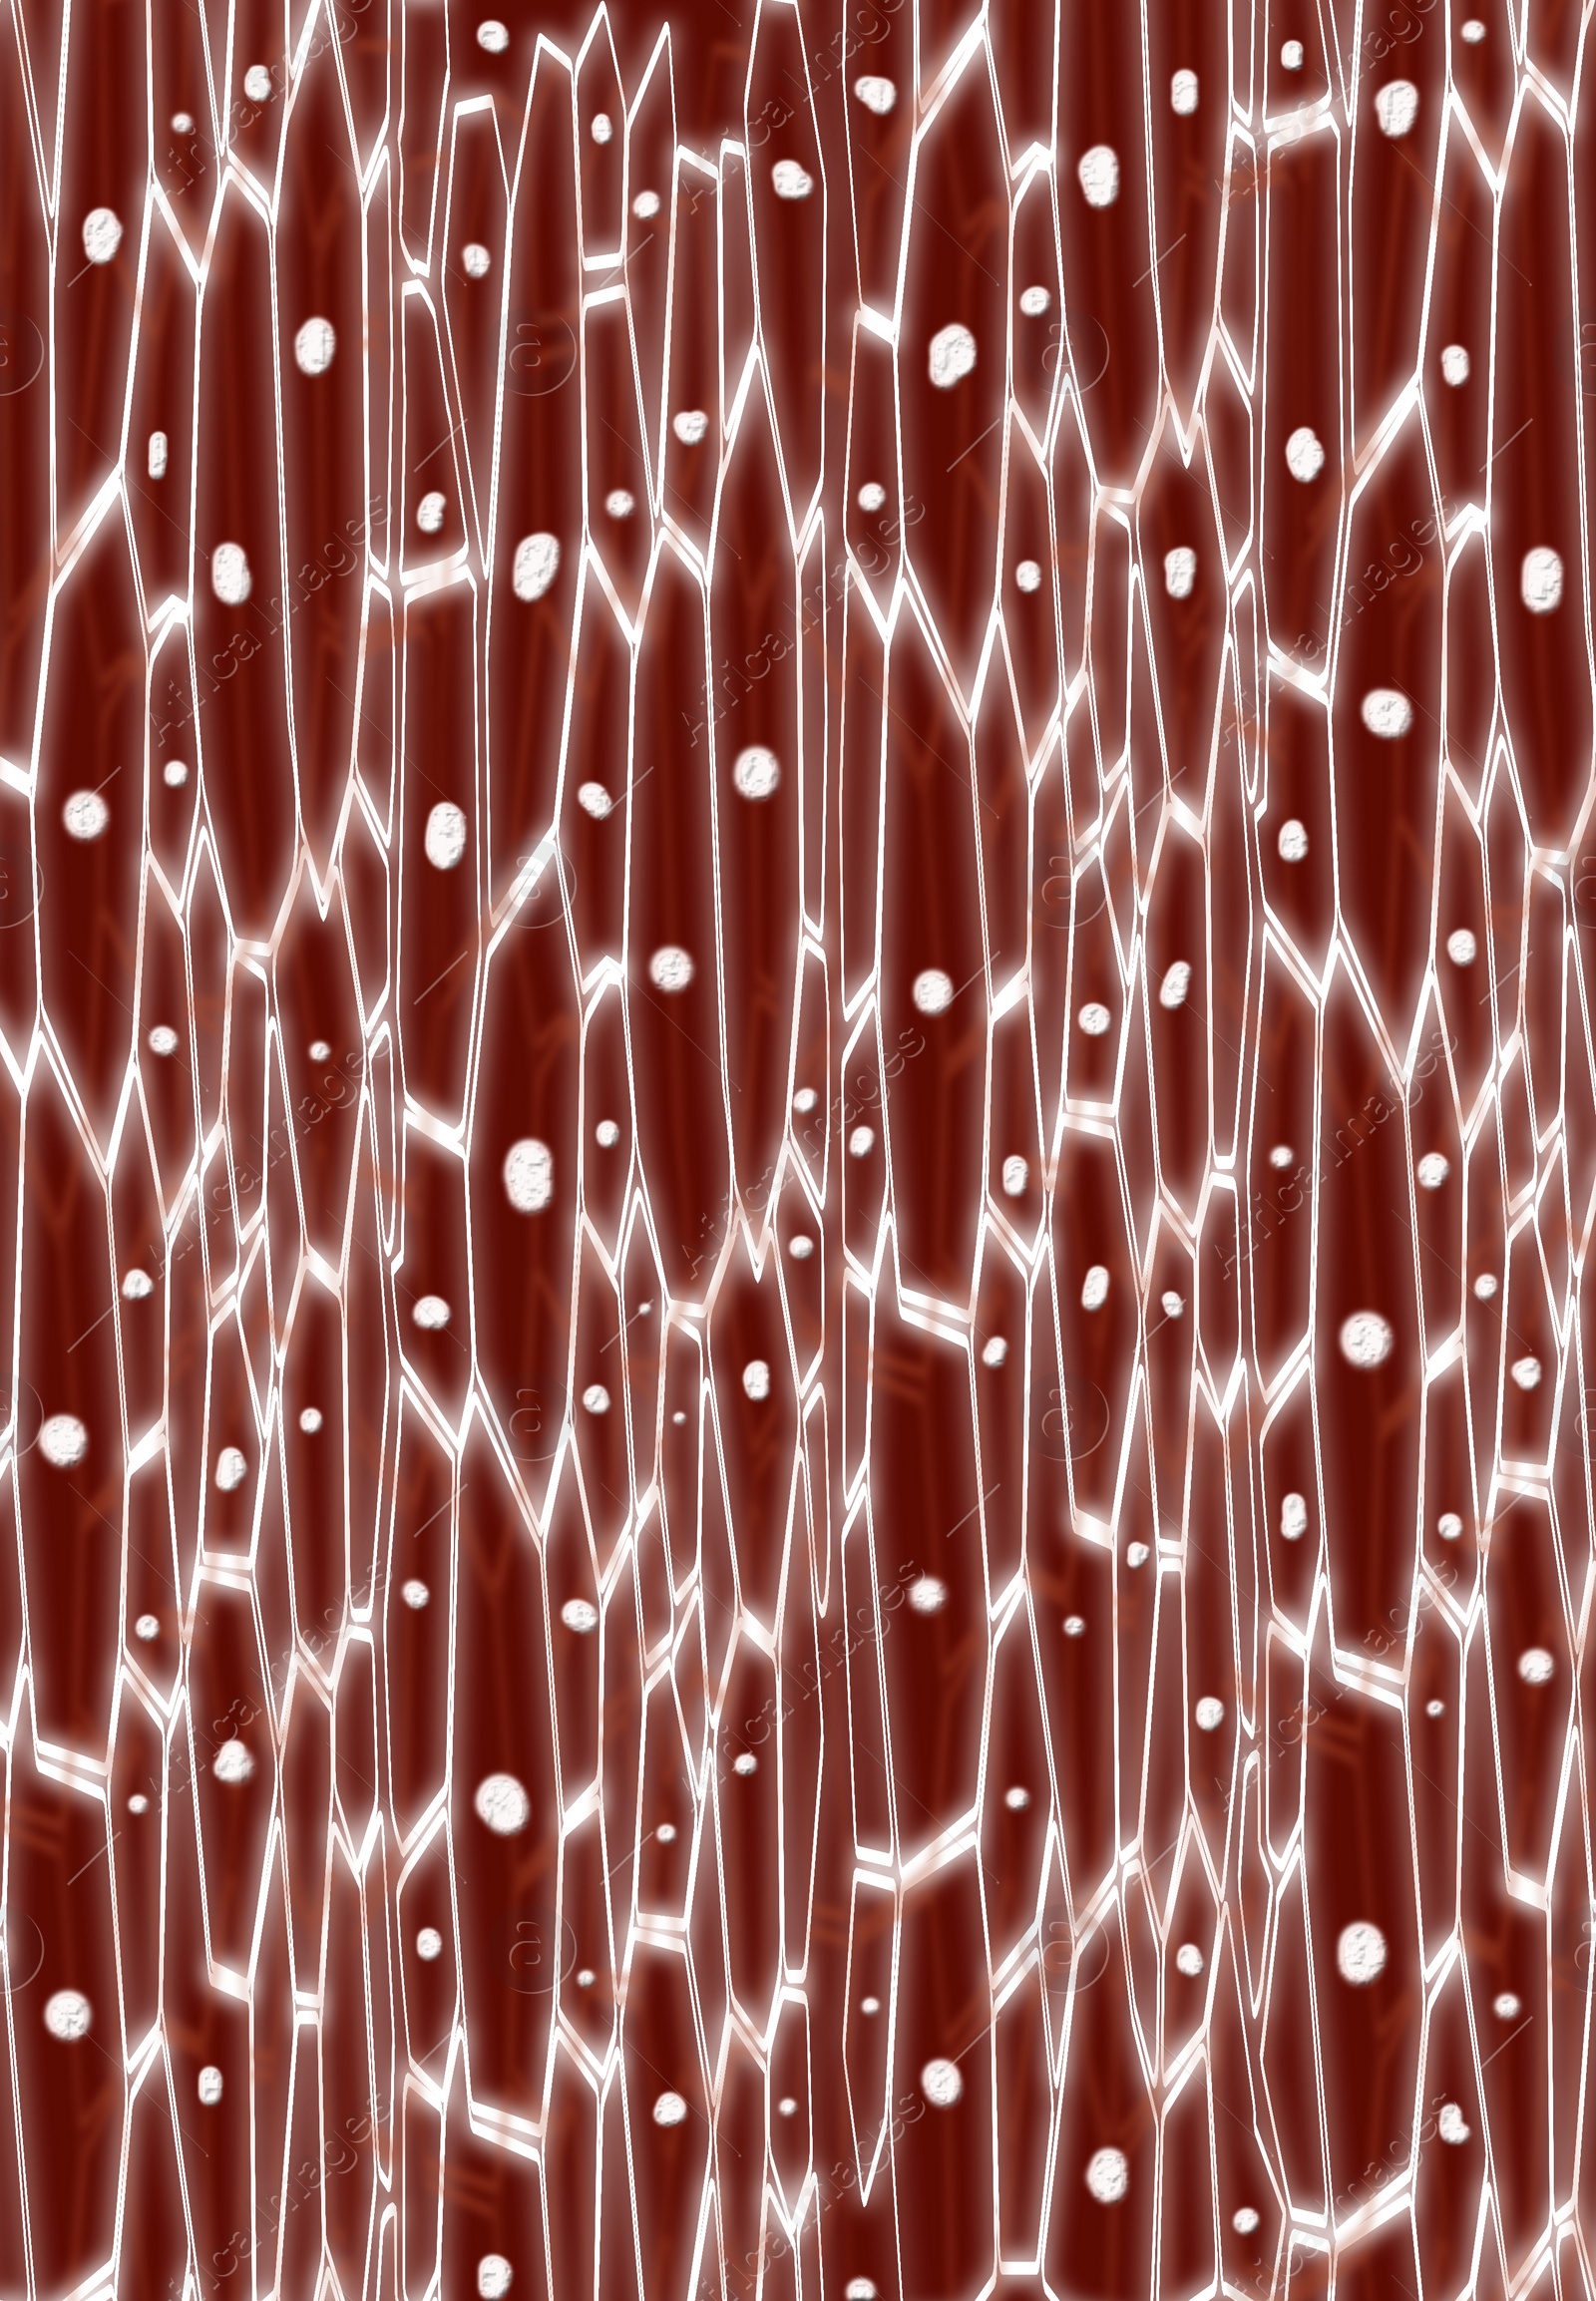 Illustration of Closeup view of blood under microscope. Illustration